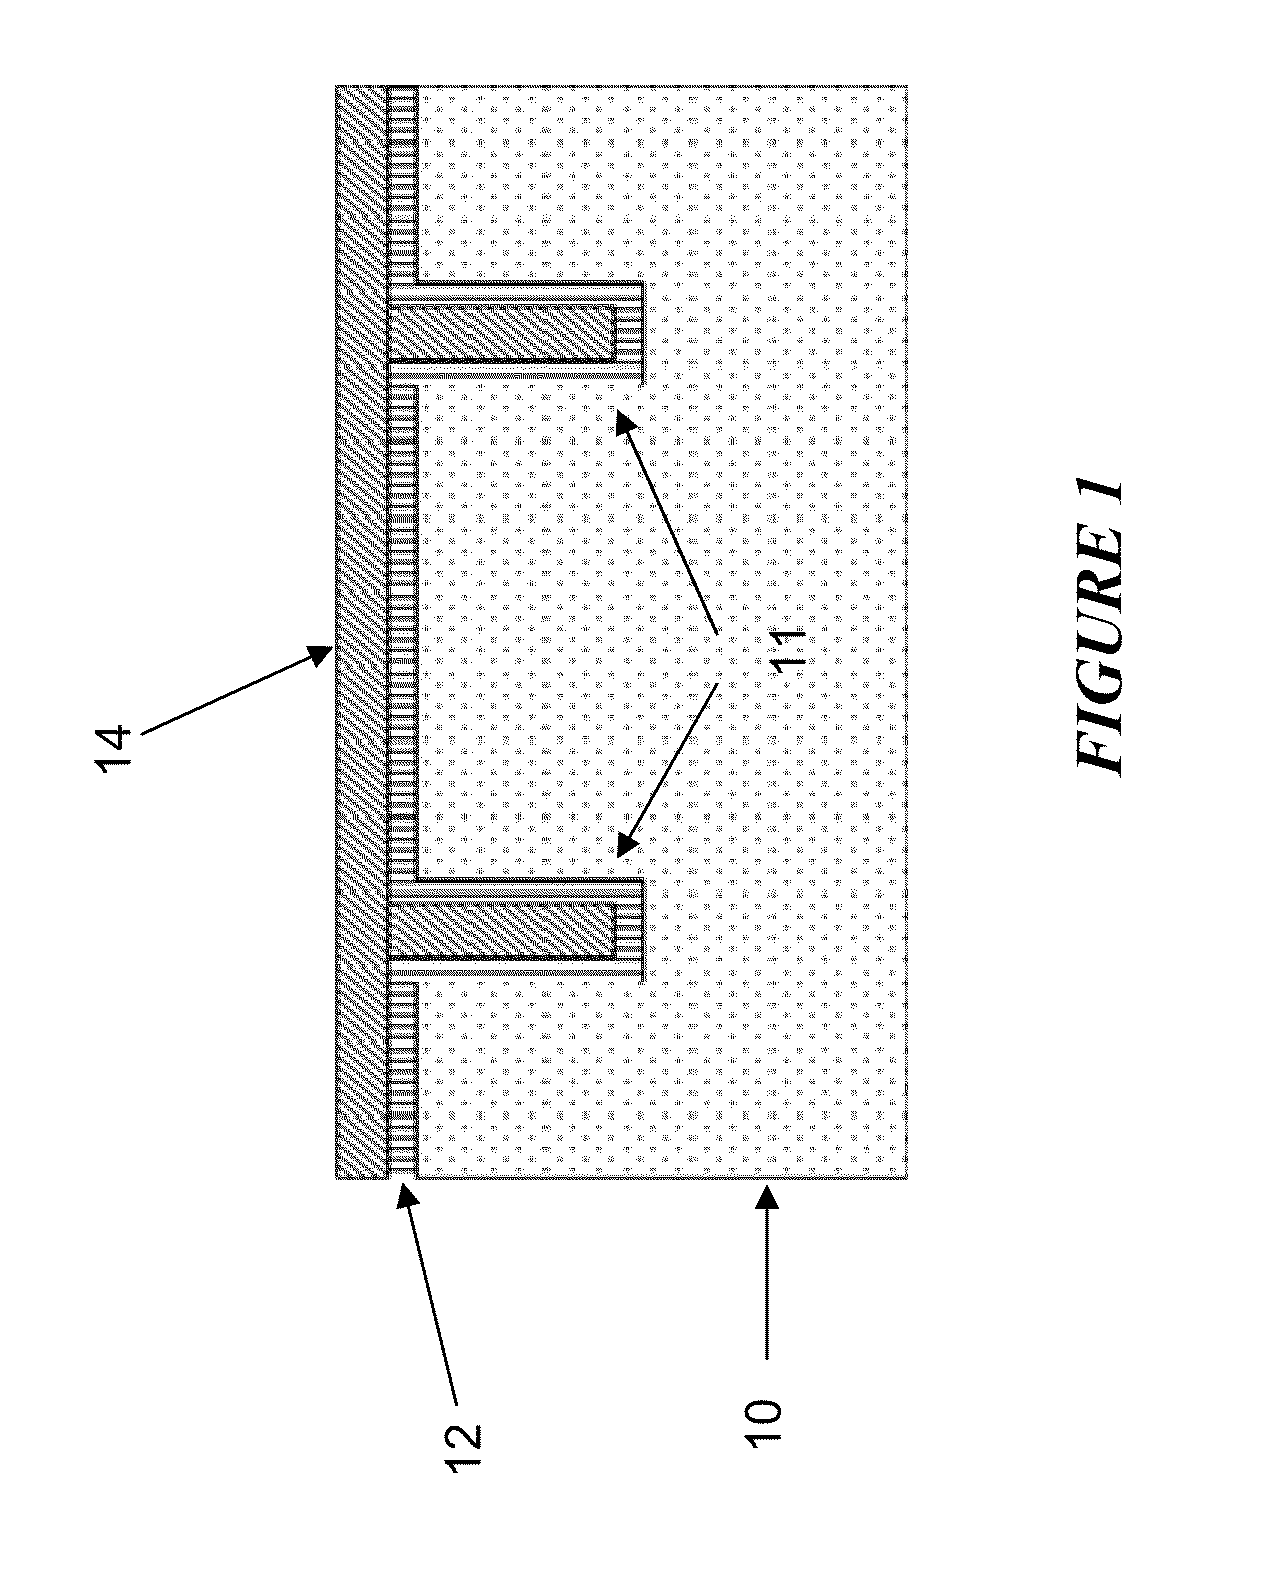 Porous silicon electro-etching system and method